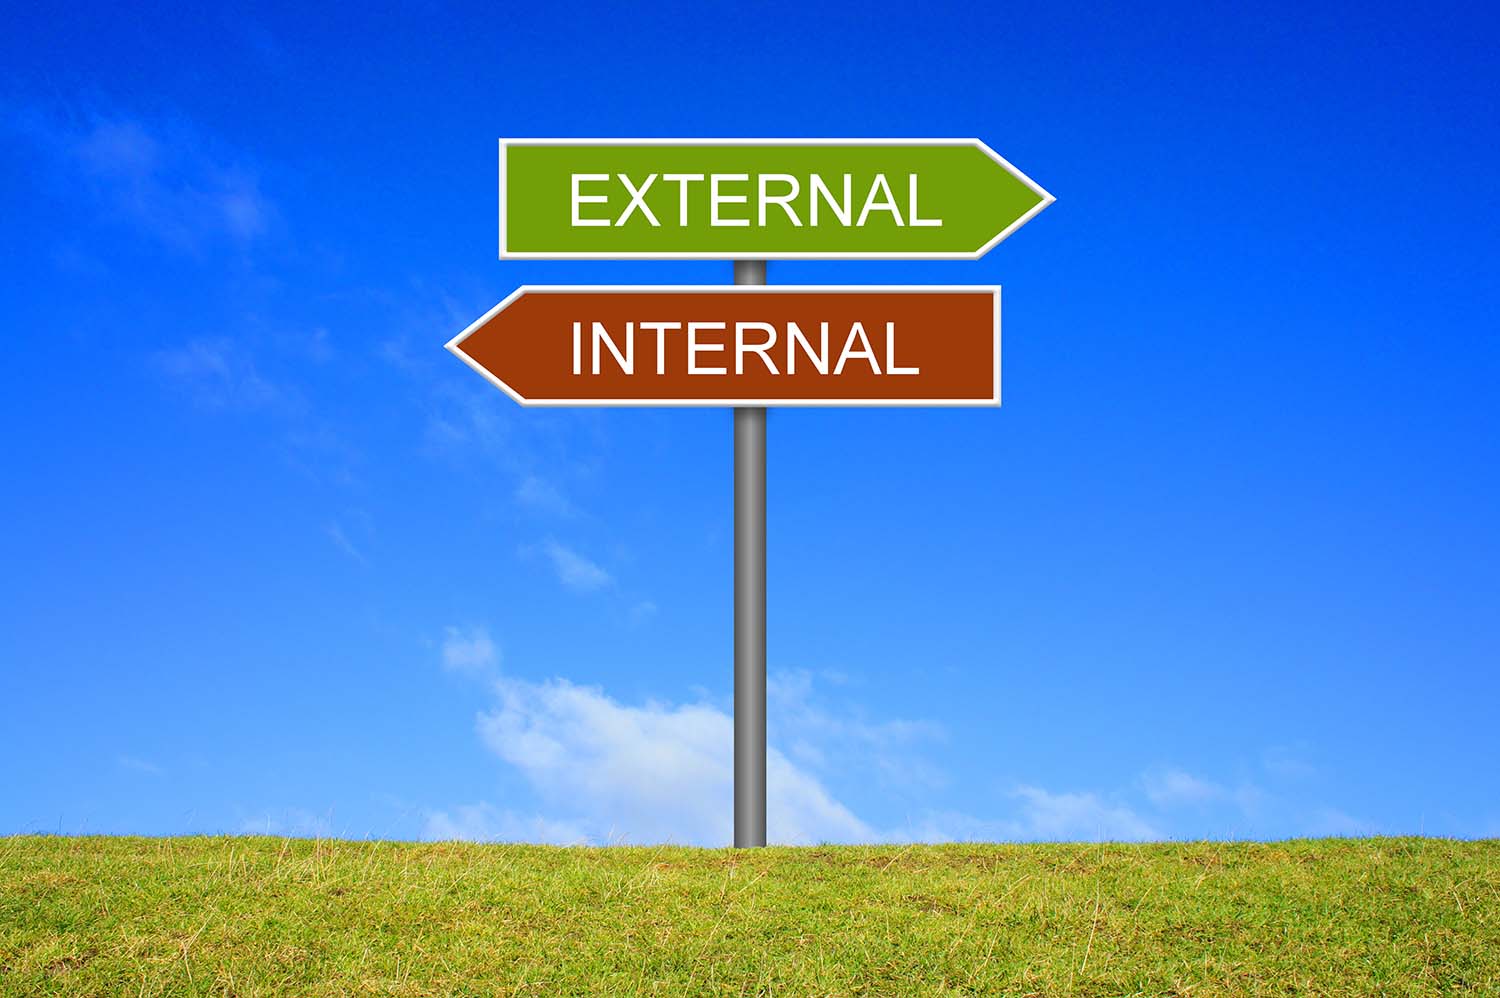 Green sign pointing right that says "External," and red sign pointing left that says, "Internal."